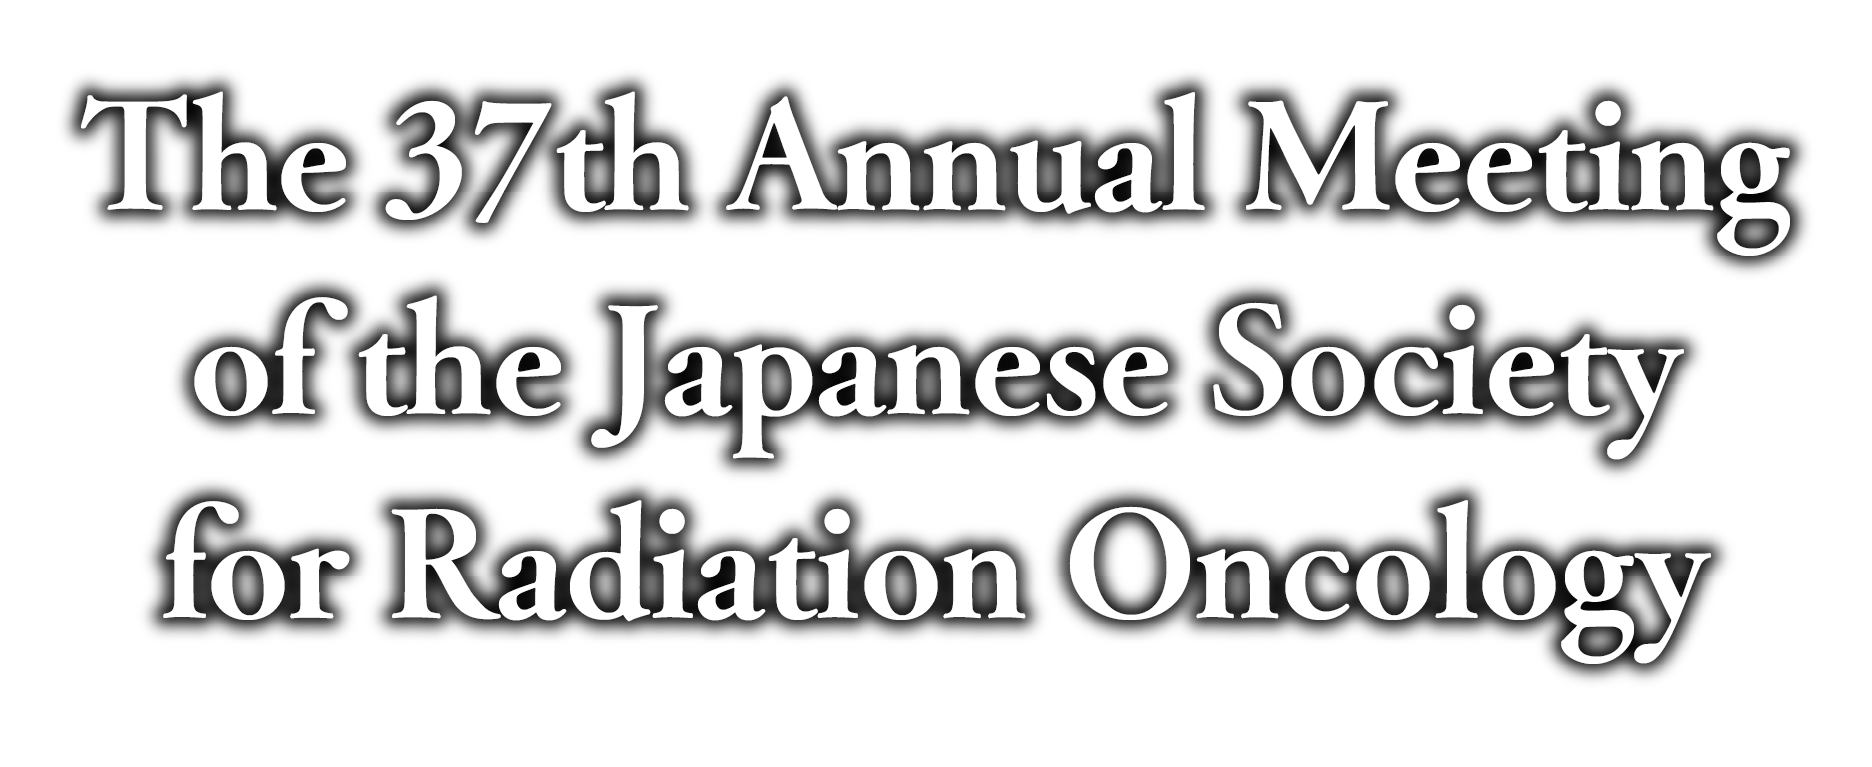 The 37th Annual Meeting of the Japanese Society for Radiation Oncology